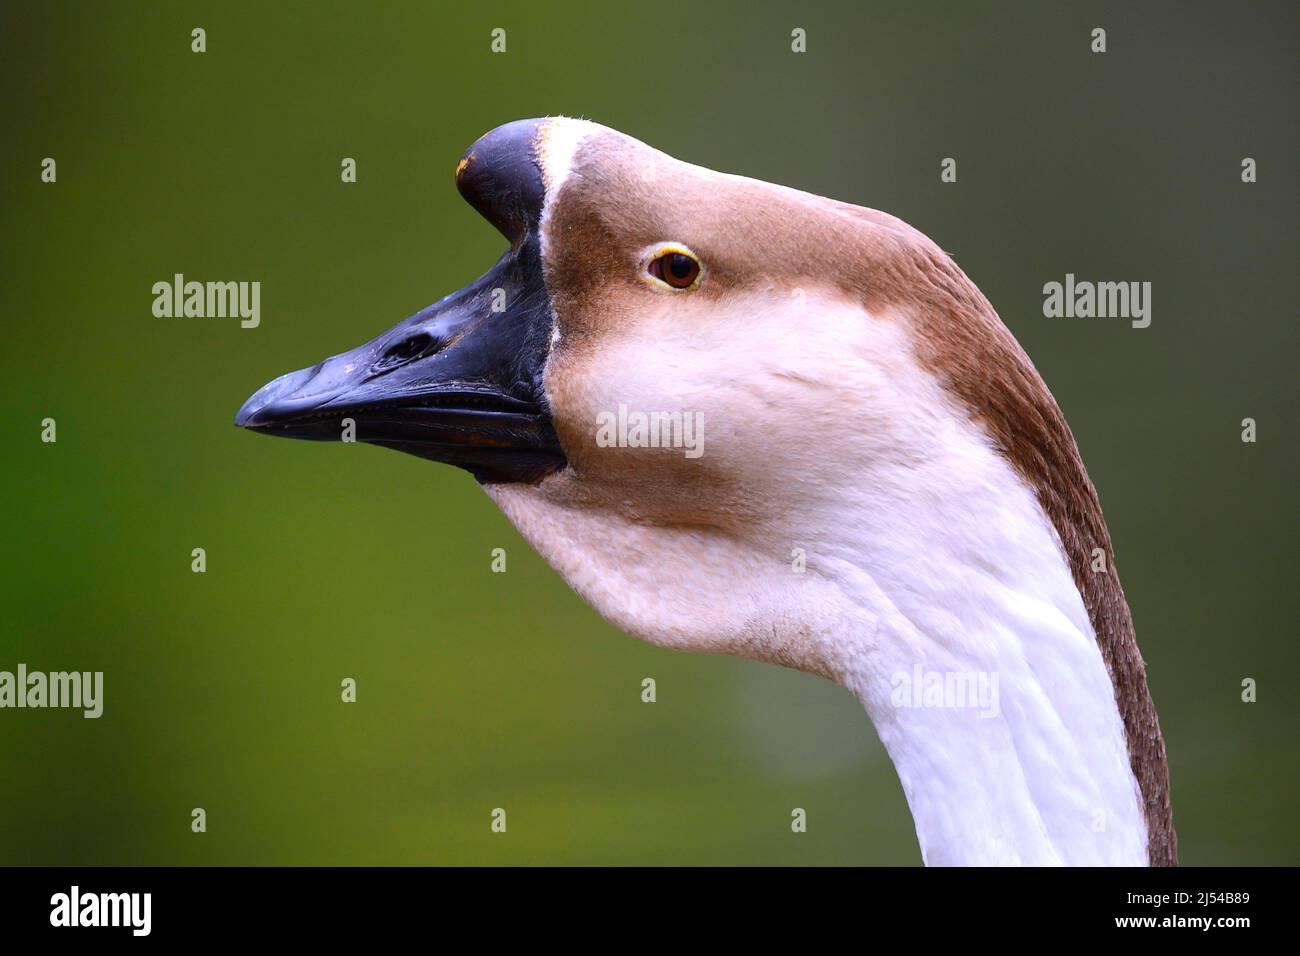 Swan Goose, Brown African Goose (Anser cygnoides), portrait Stock Photo